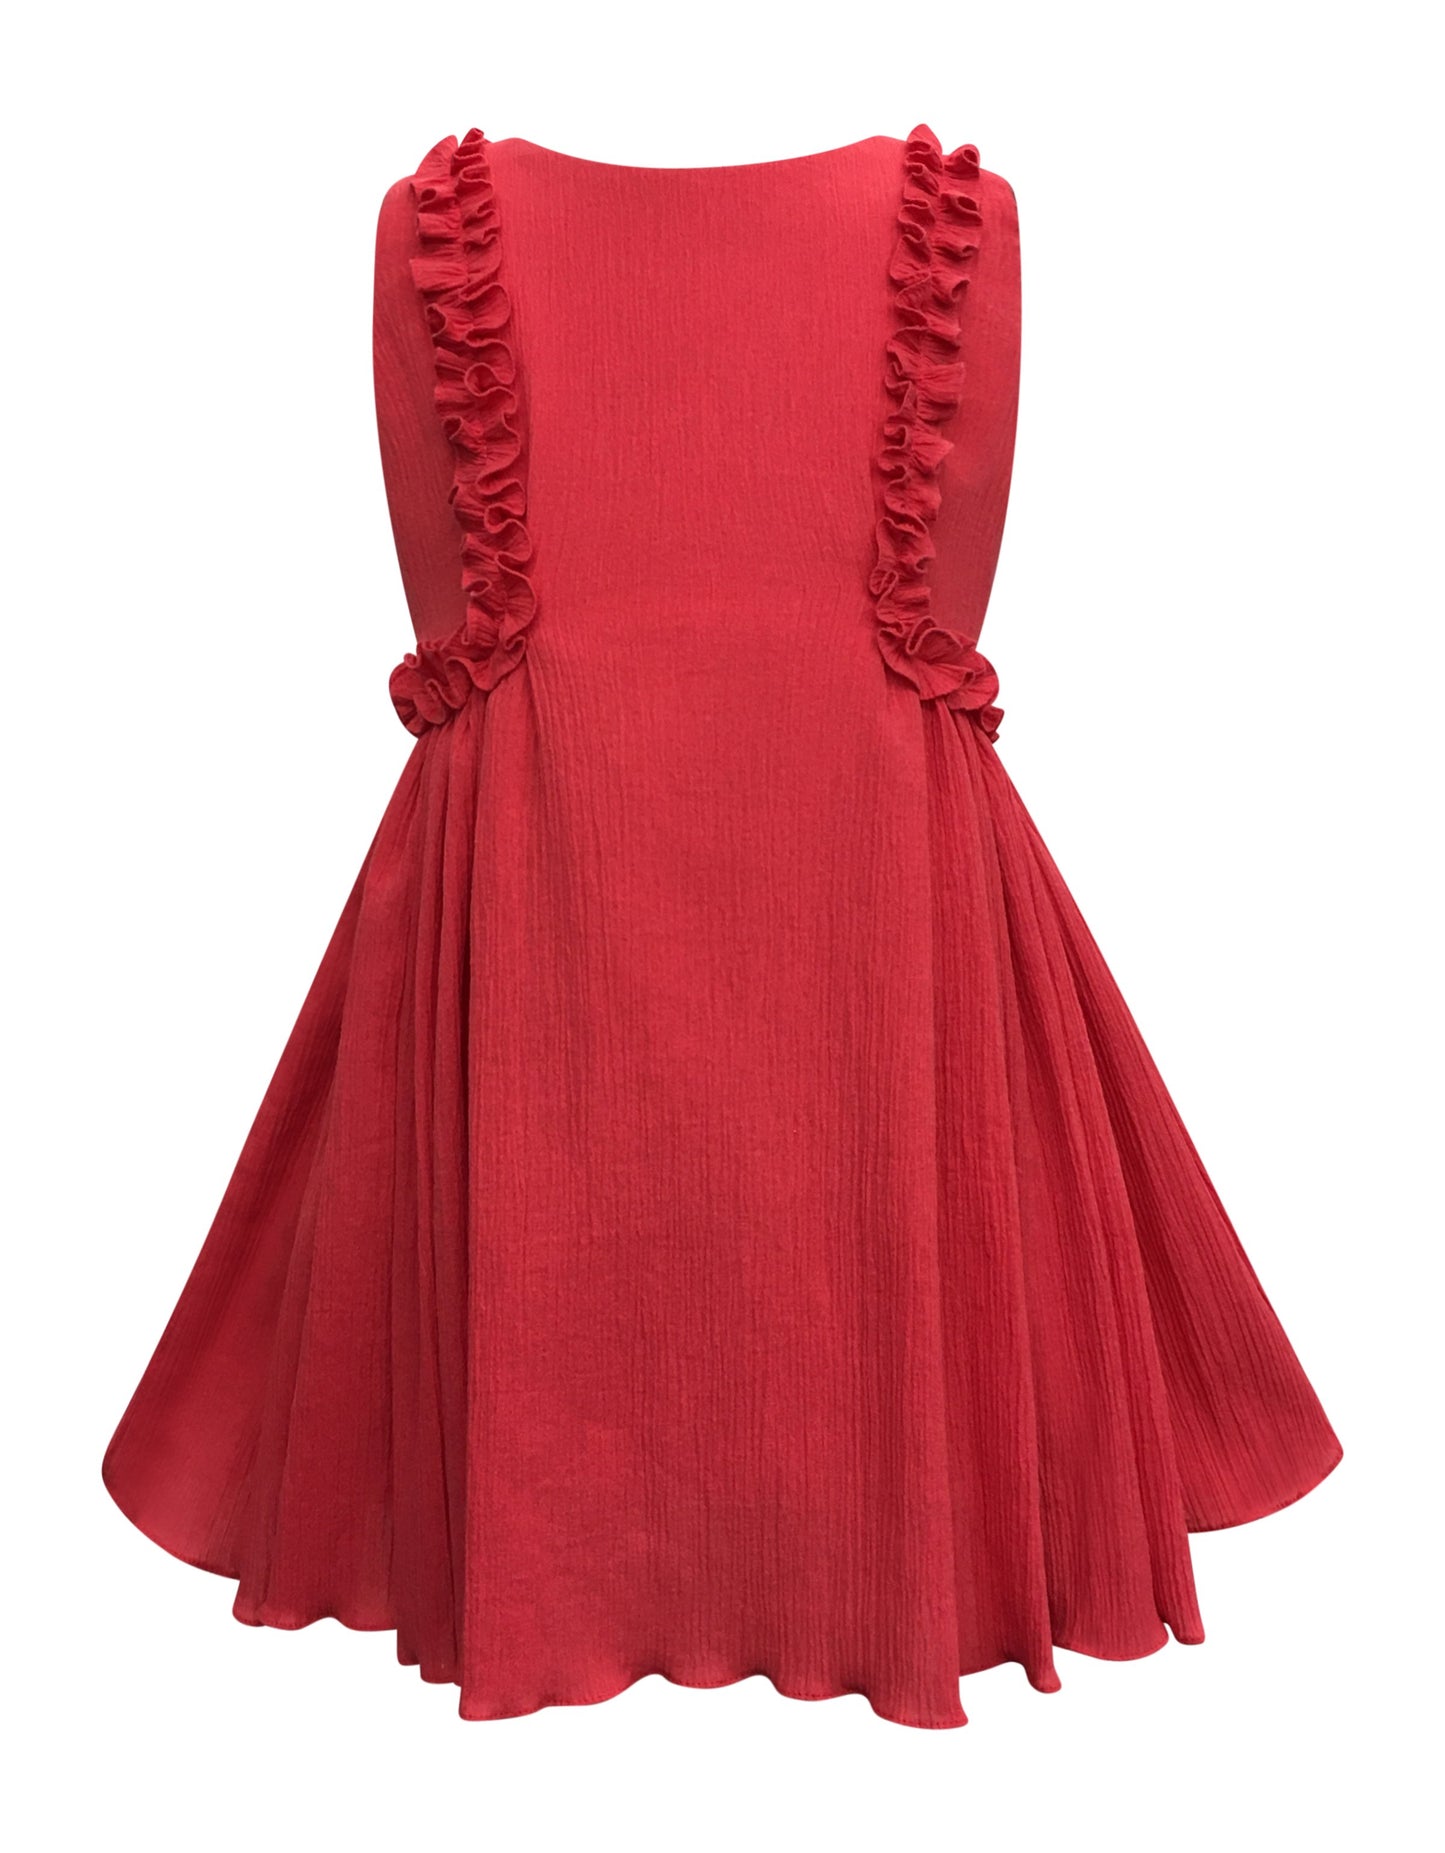 Helena and Harry Girl's Coral Crinkle Cotton Sundress